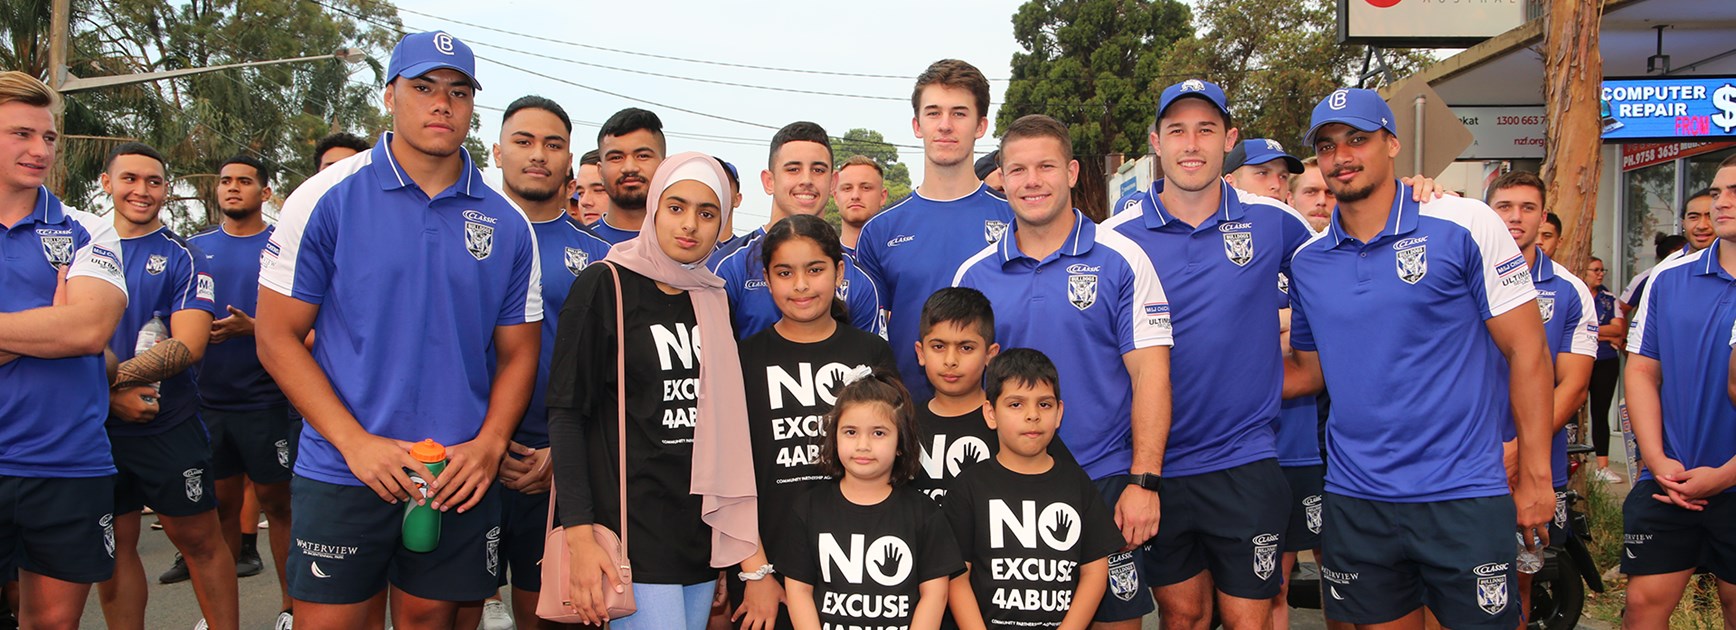 Bulldogs walk to support ‘No Excuse for Abuse’